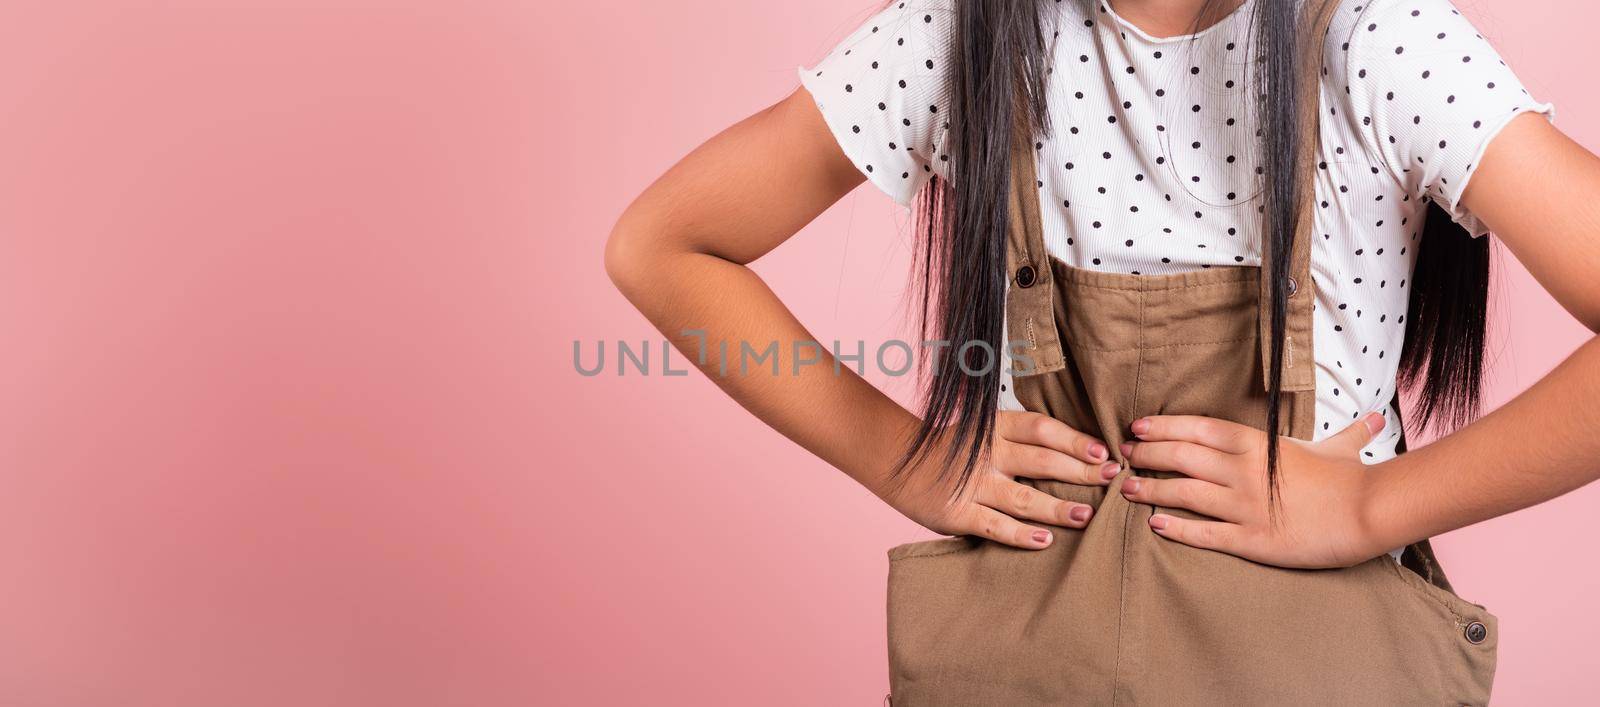 Asian little kid 10 years old suffering from stomach ache at studio shot isolated on pink background, Happy child girl hand hold stomach pain because indigestion, painful illness feeling unwell